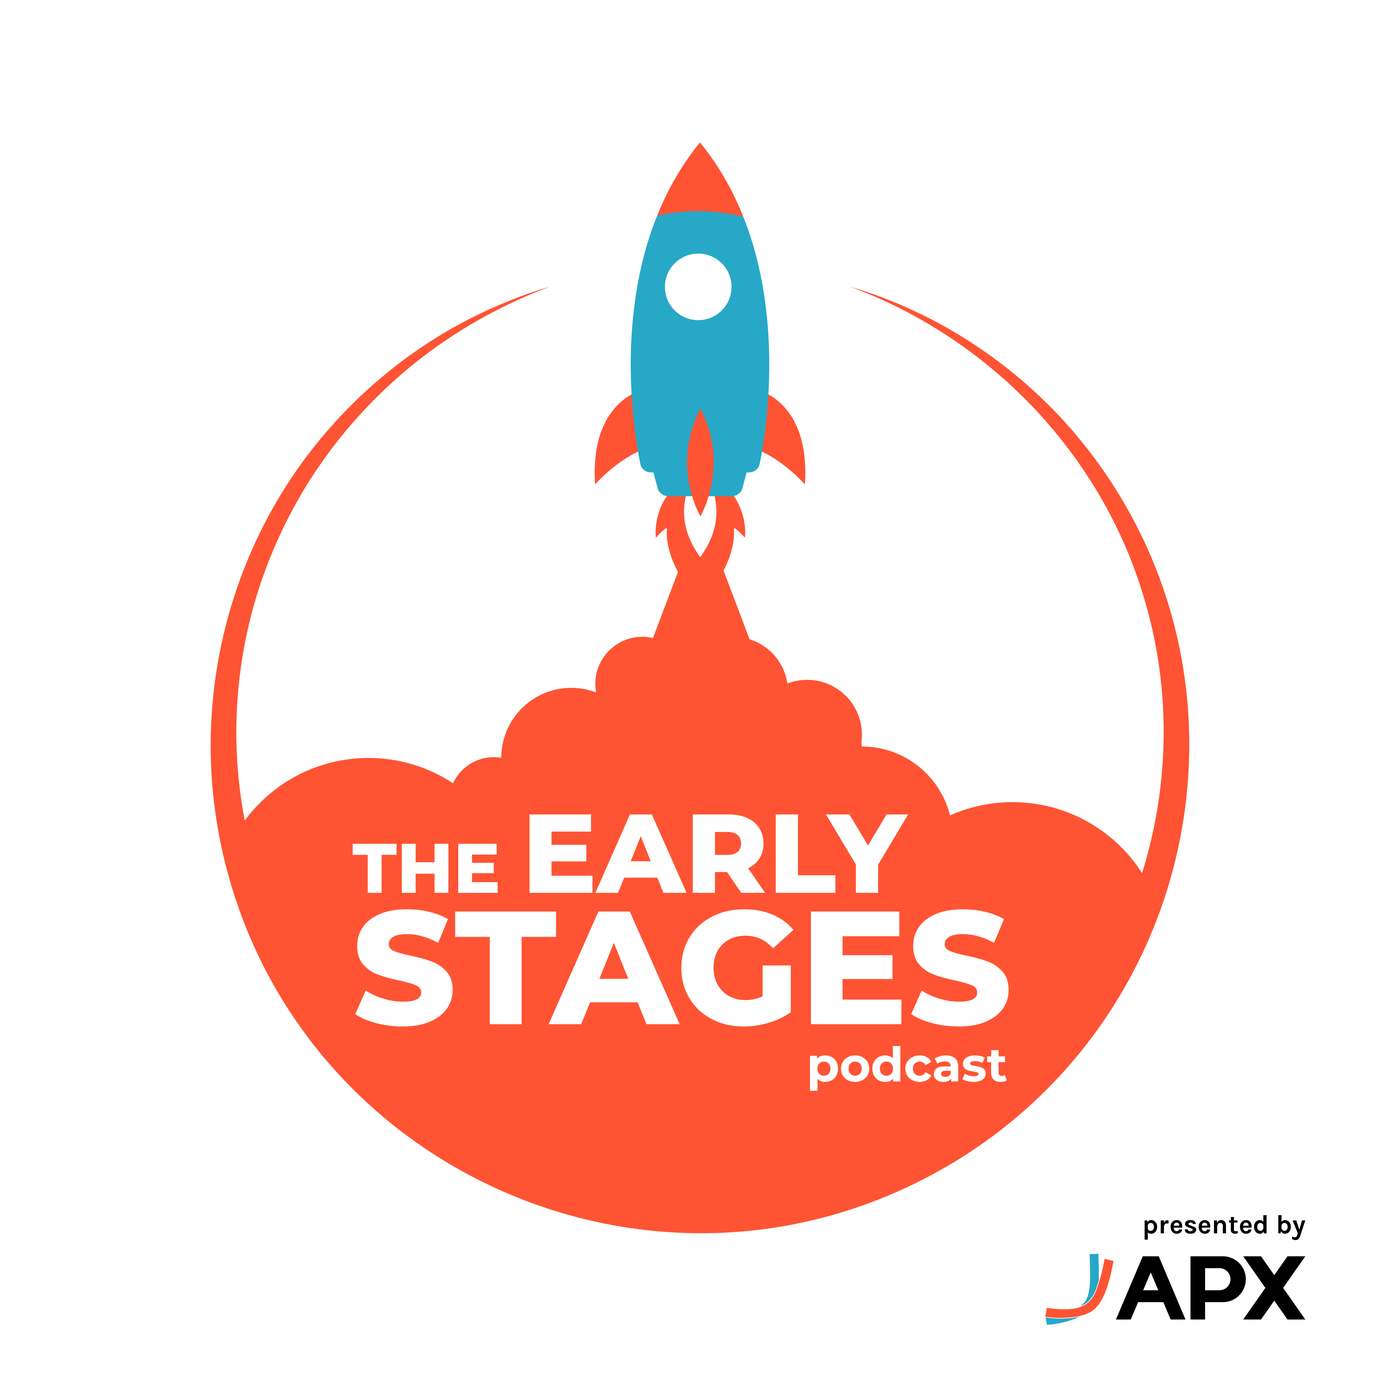 The Early Stages Podcast by APX